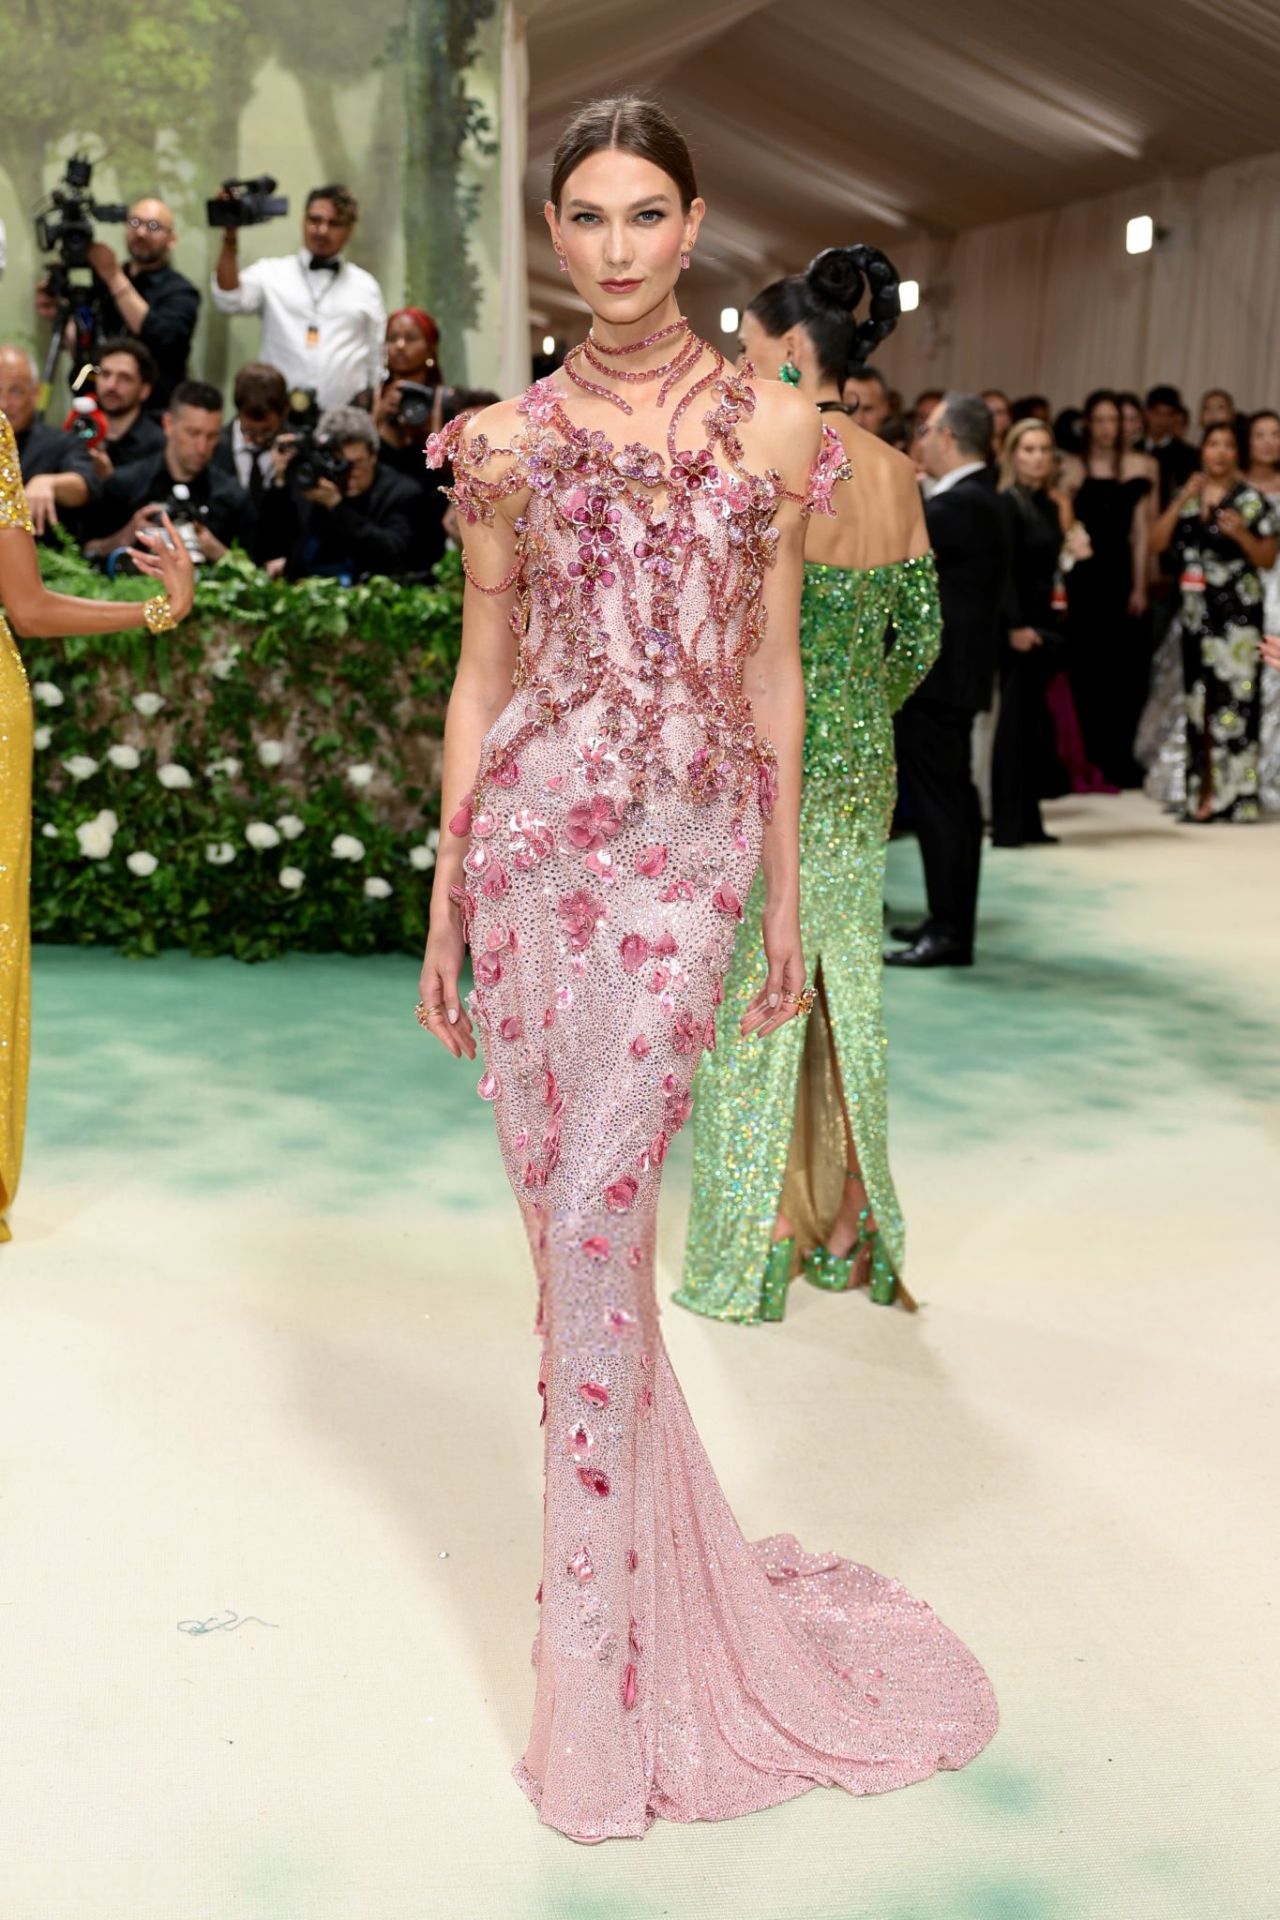 KARLIE KLOSS IN PINK BEJEWELED GOWN AT THE 2024 MET GALA IN NEW YORK01